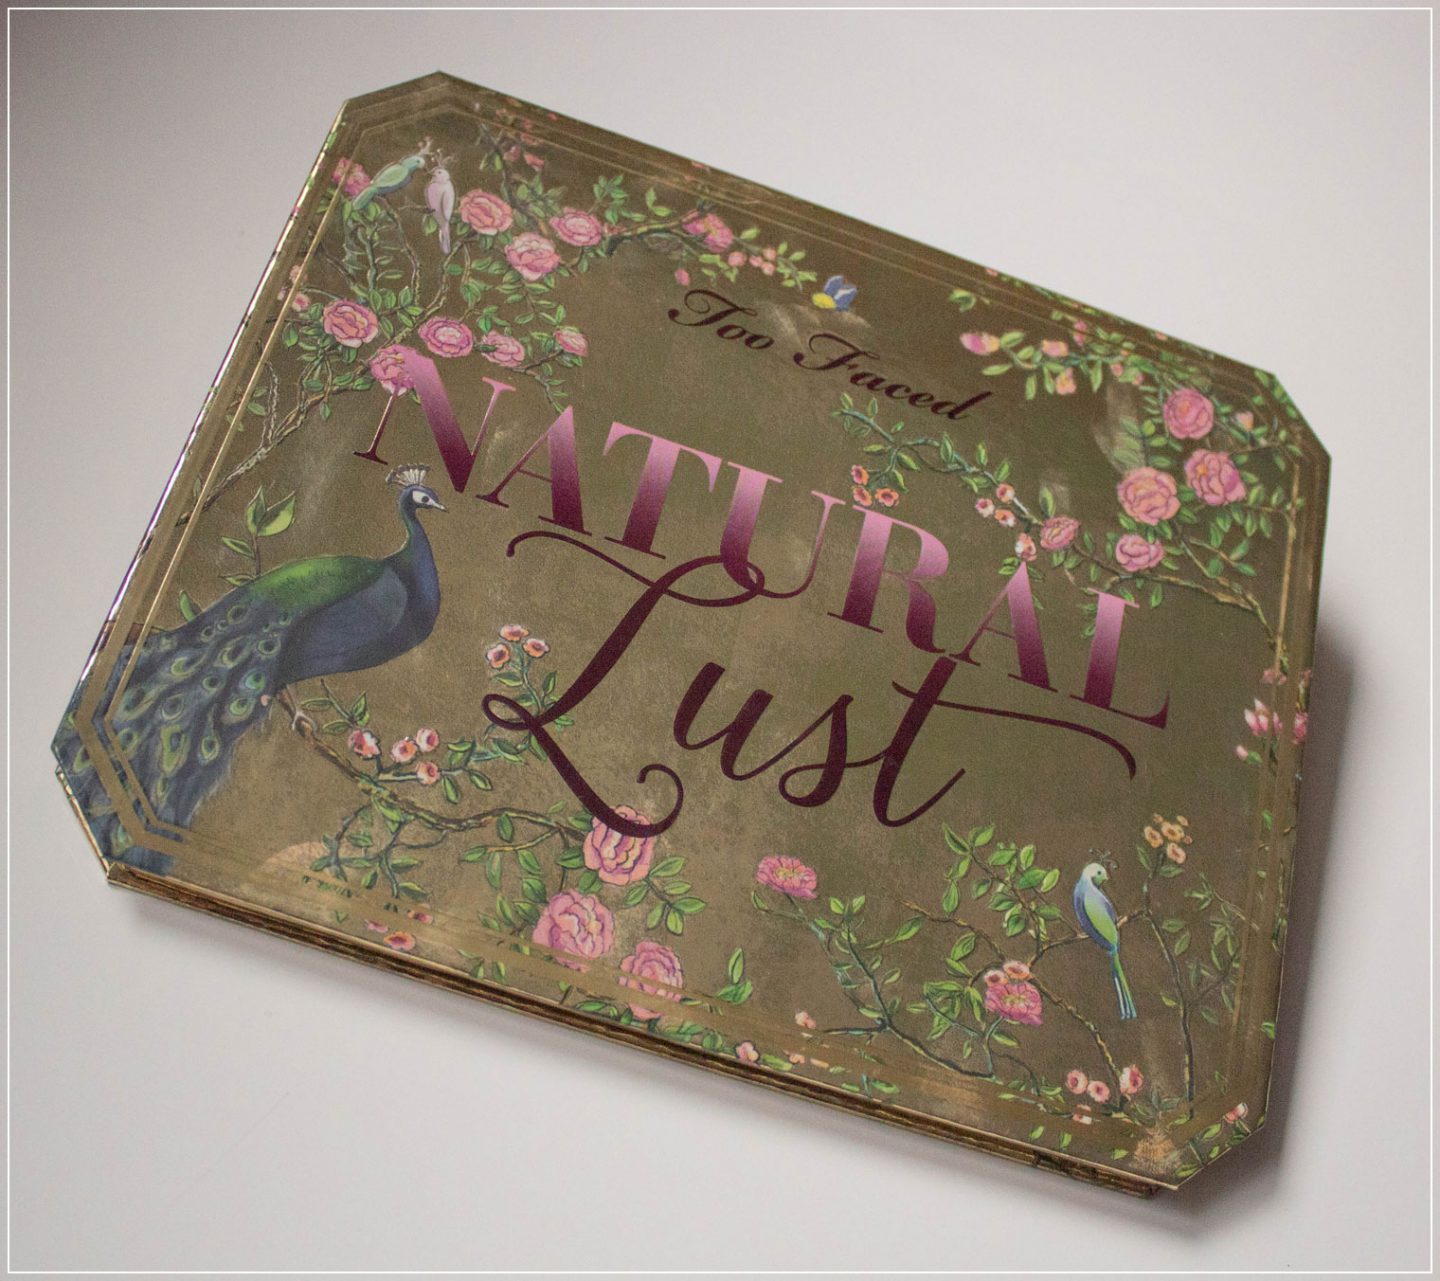 Too Faced, Natural Lust Palette, Weihnachts-Make-Up, Holiday Season, Festliches Make-Up, Lidschatten-Palette Beautytutorial, Make-up Tutorial, Beauty Blog, Beautybloggerin, Ruhrgebiet